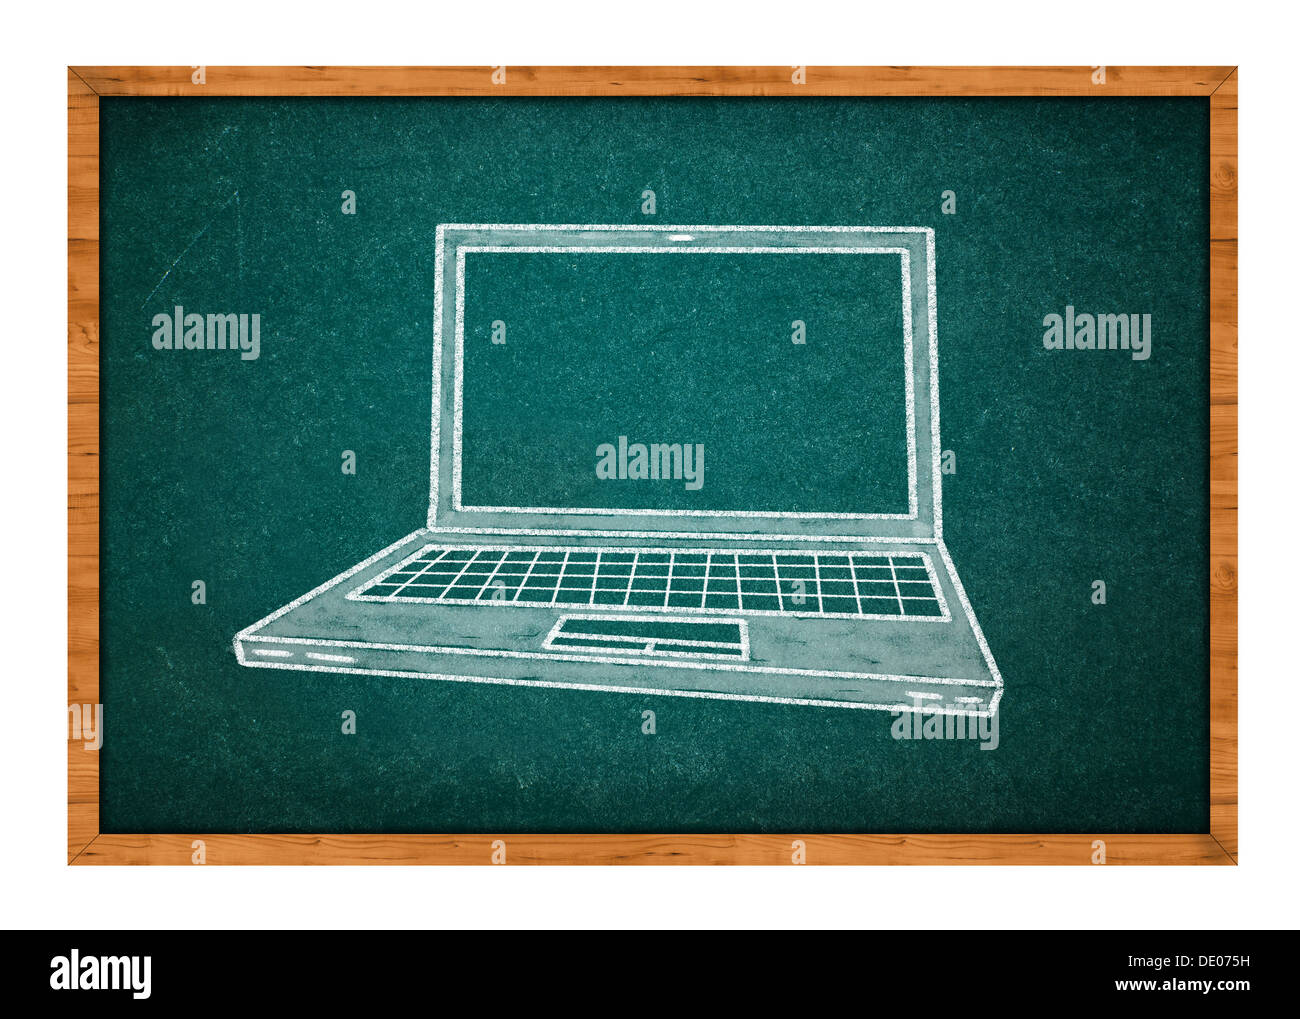 Simple drawing of laptop or notebook computer on a green school chalkboard. Stock Photo